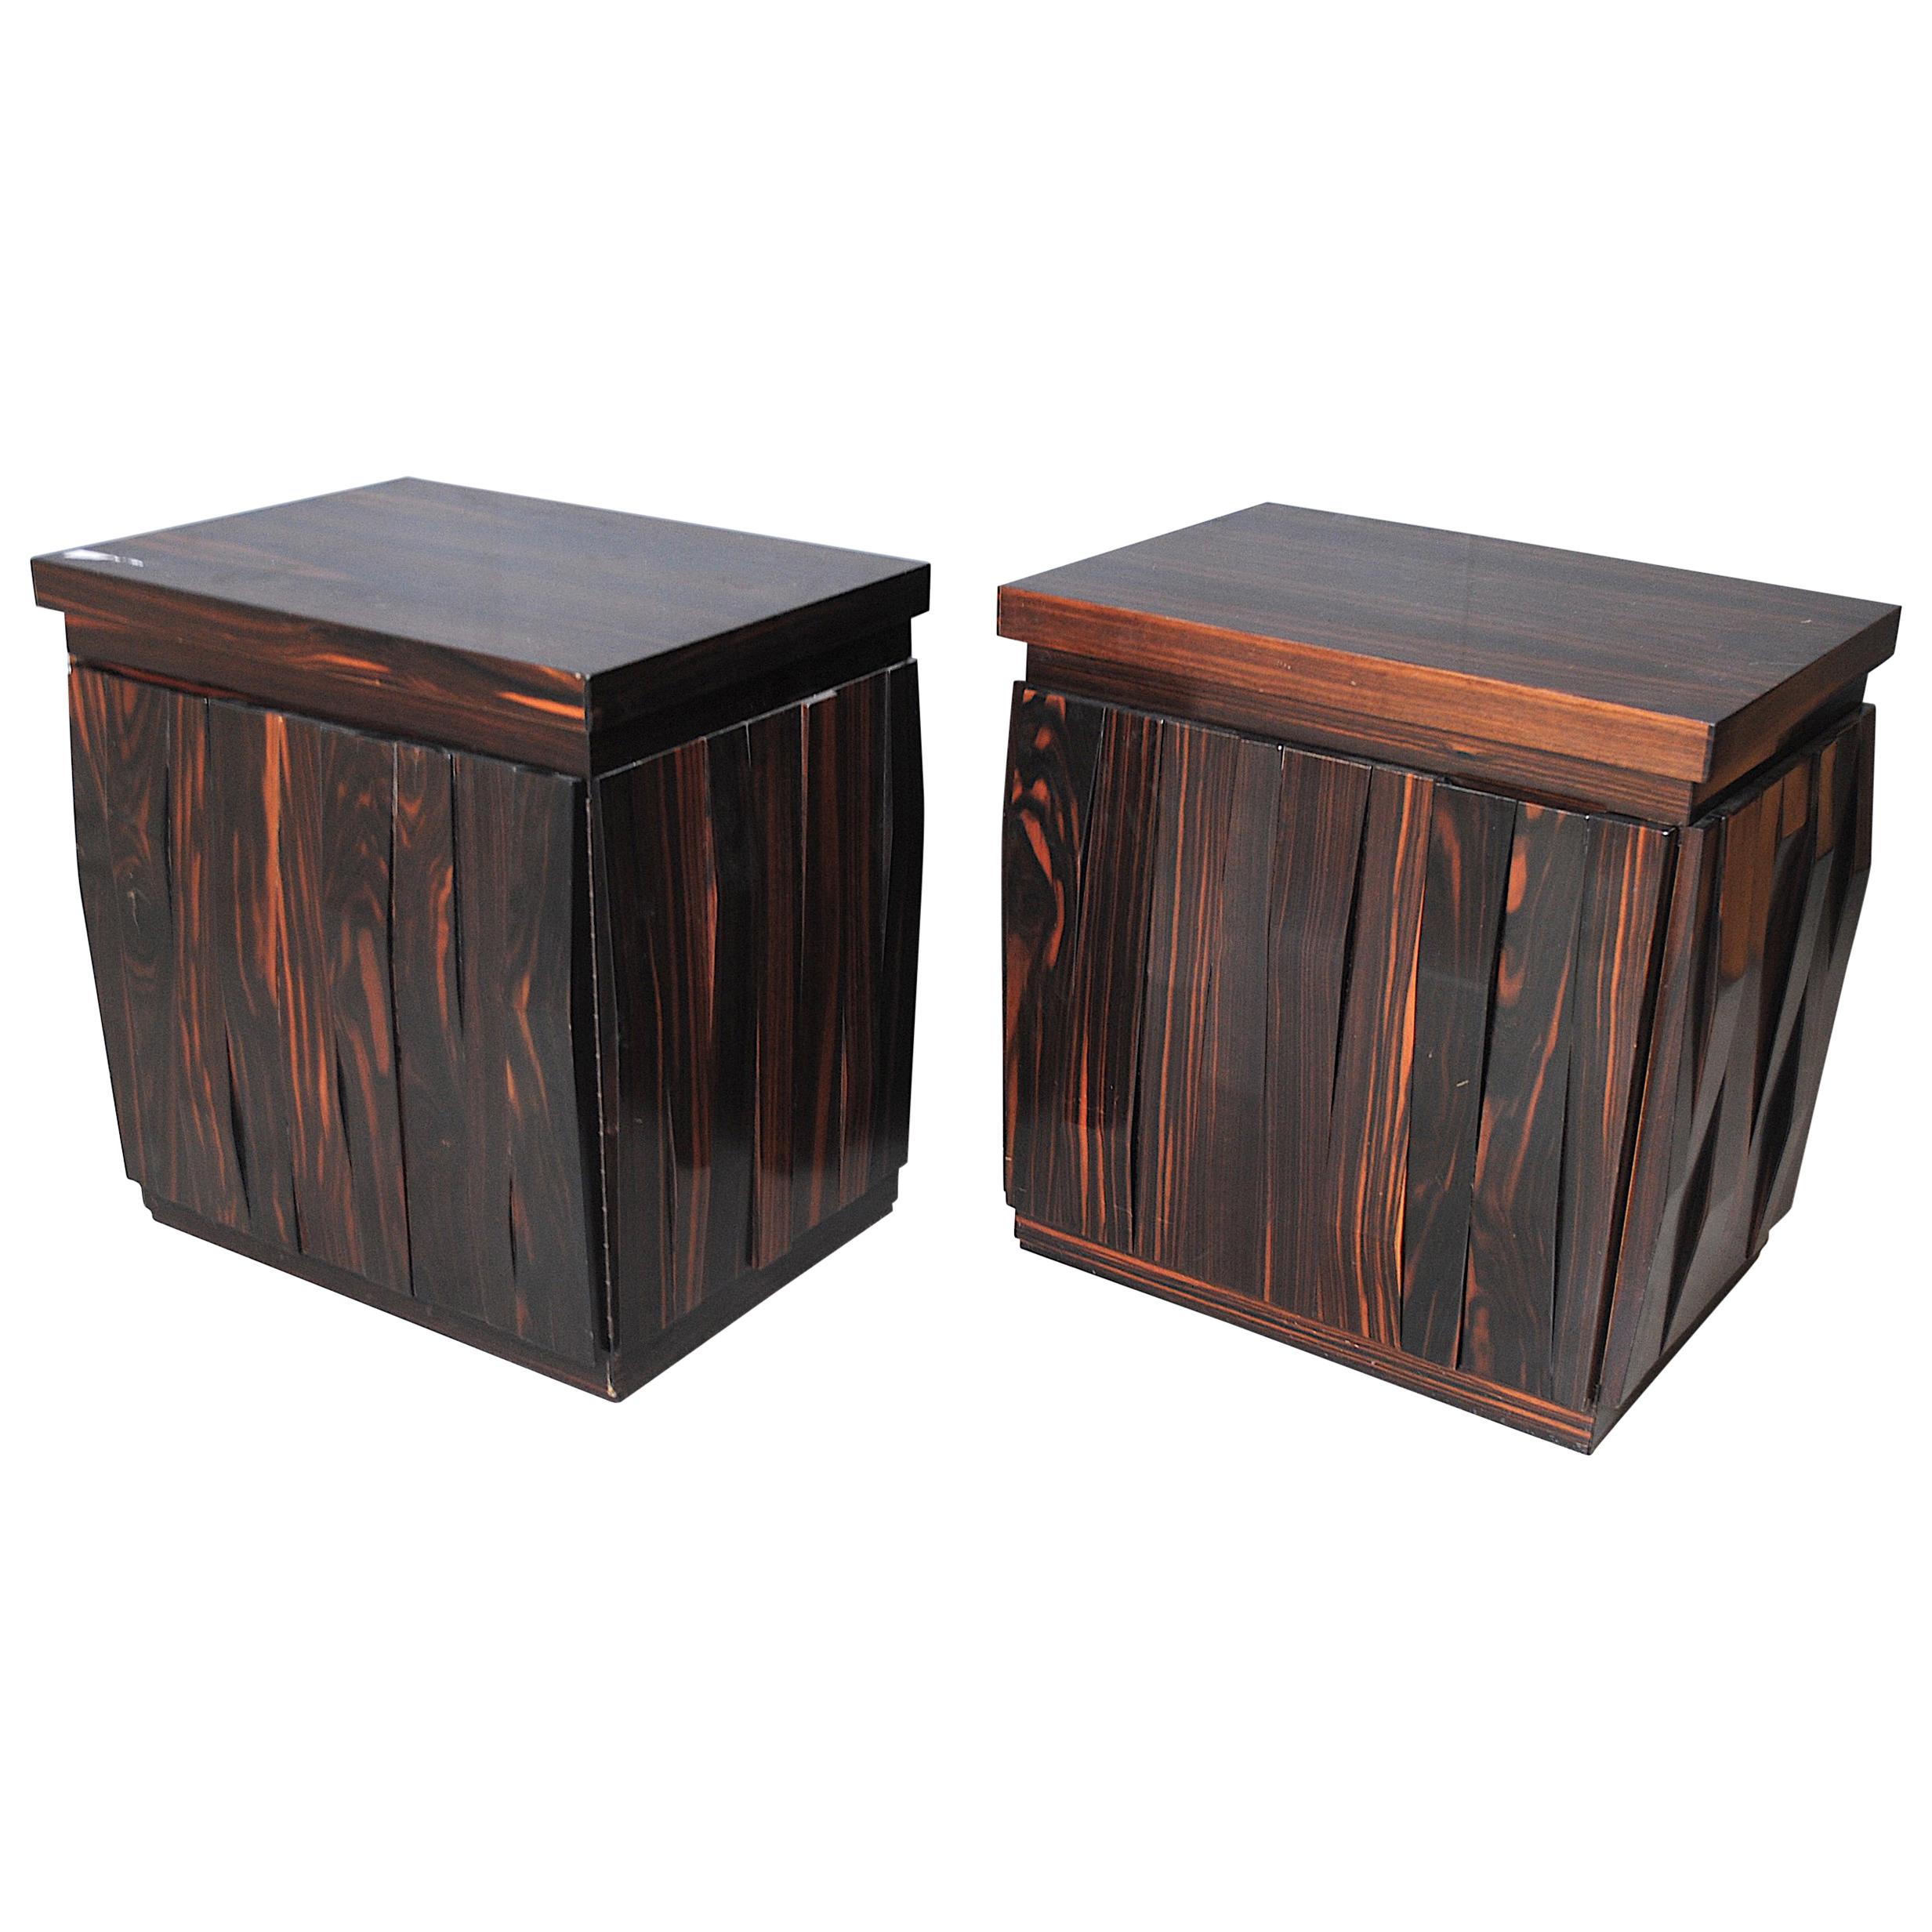 Frigerio Luciano Desio Two Bedside Barium Series in Solid Rosewood, Gold Label